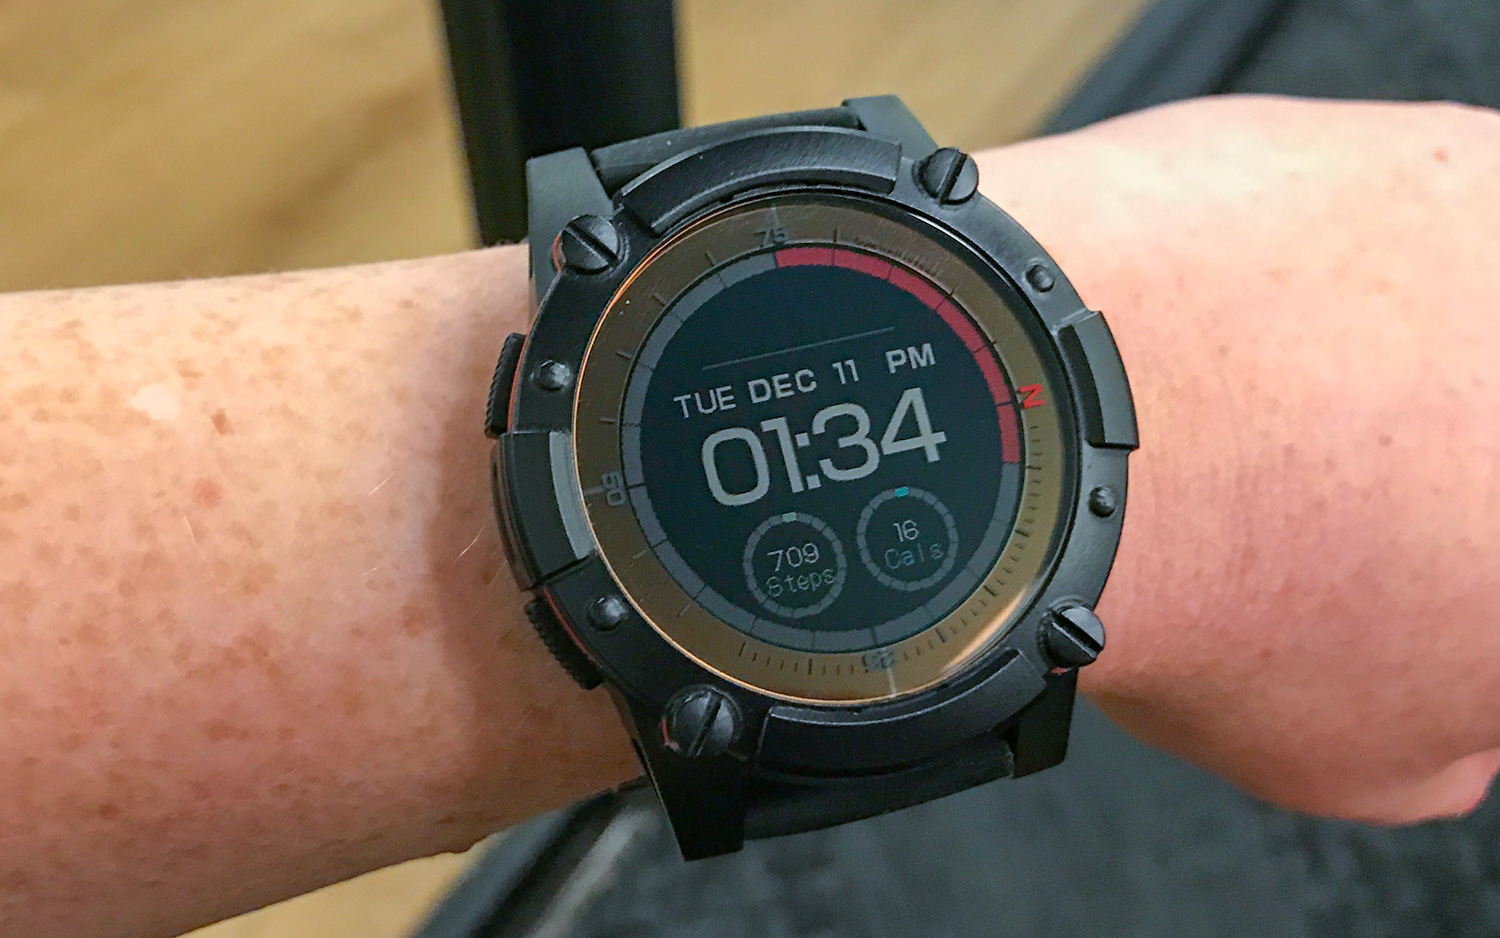 Open Kracht ik ben trots New Smartwatch Uses Solar Power, Body Heat to Last Years on a Charge |  Tom's Guide